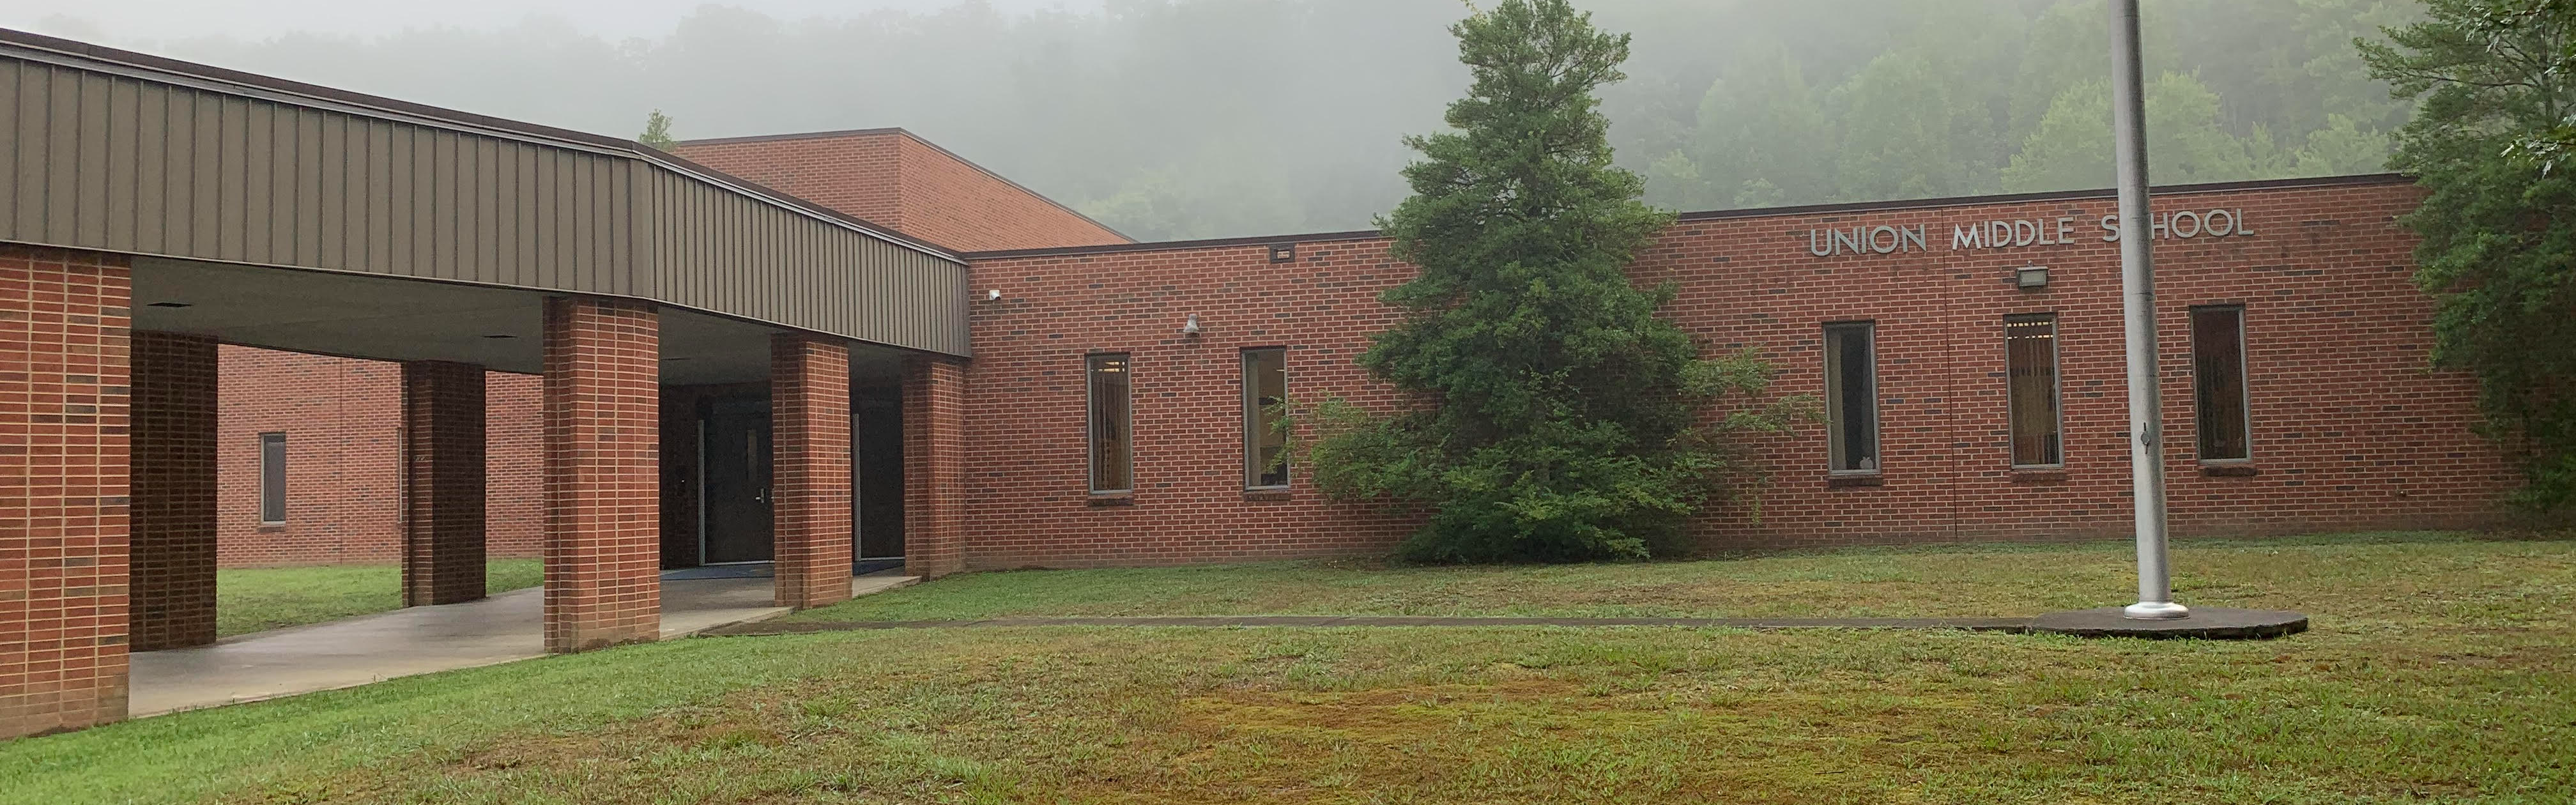 Foggy picture of Union Middle School